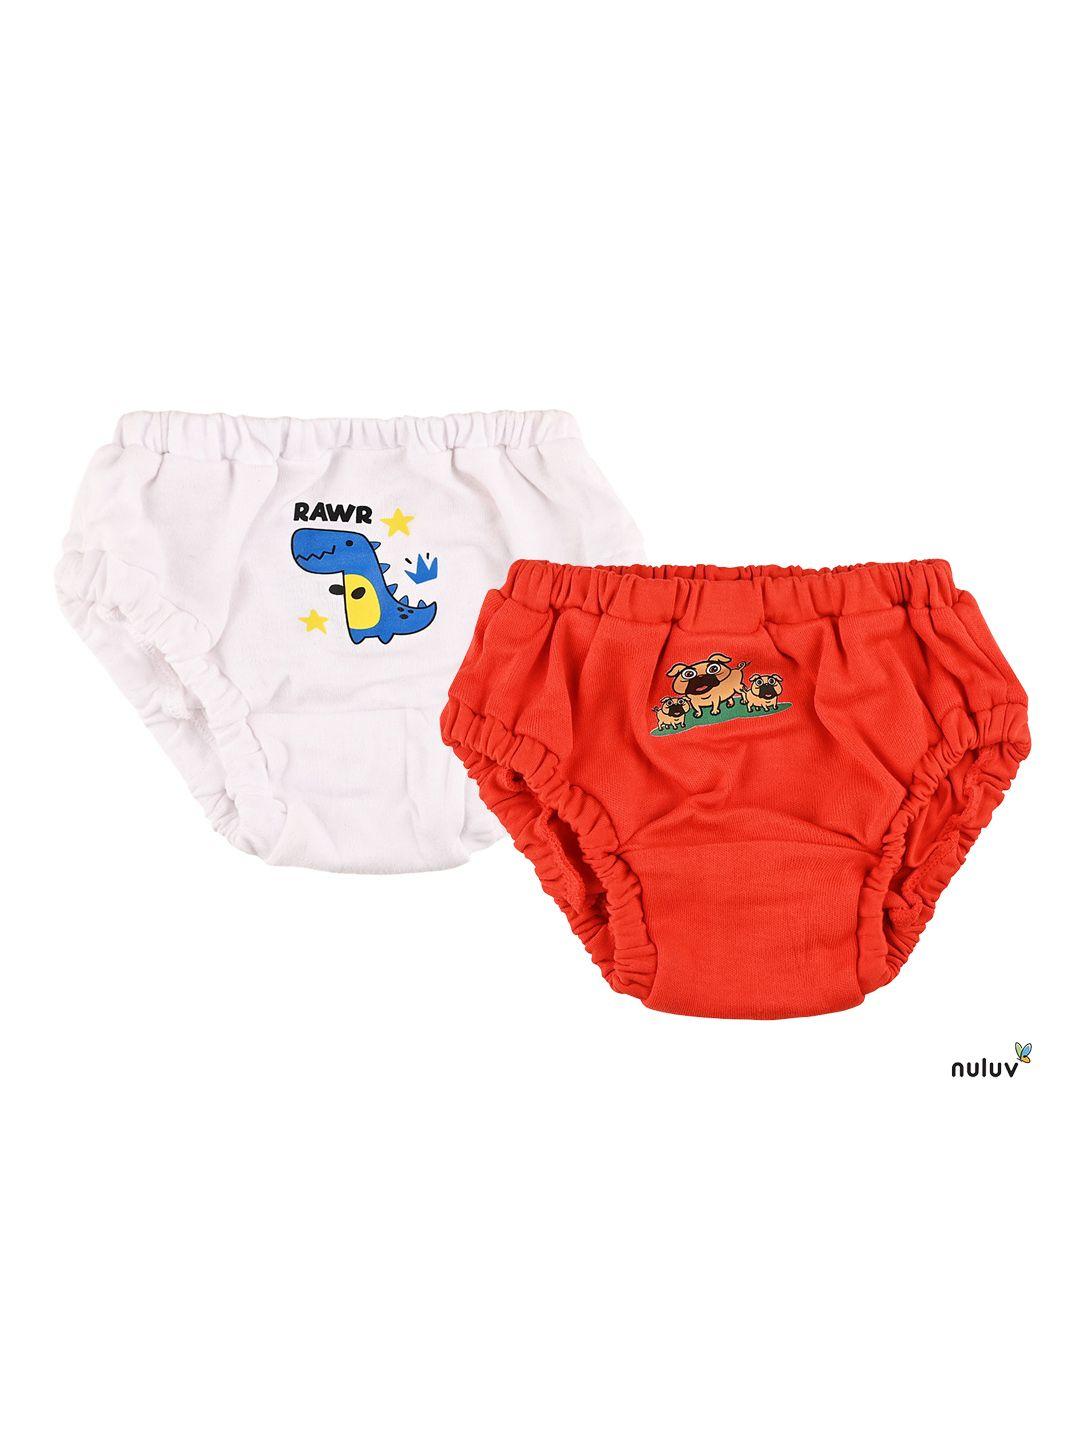 nuluv boys pack of 2 printed pure cotton basic briefs nlinfbi2005